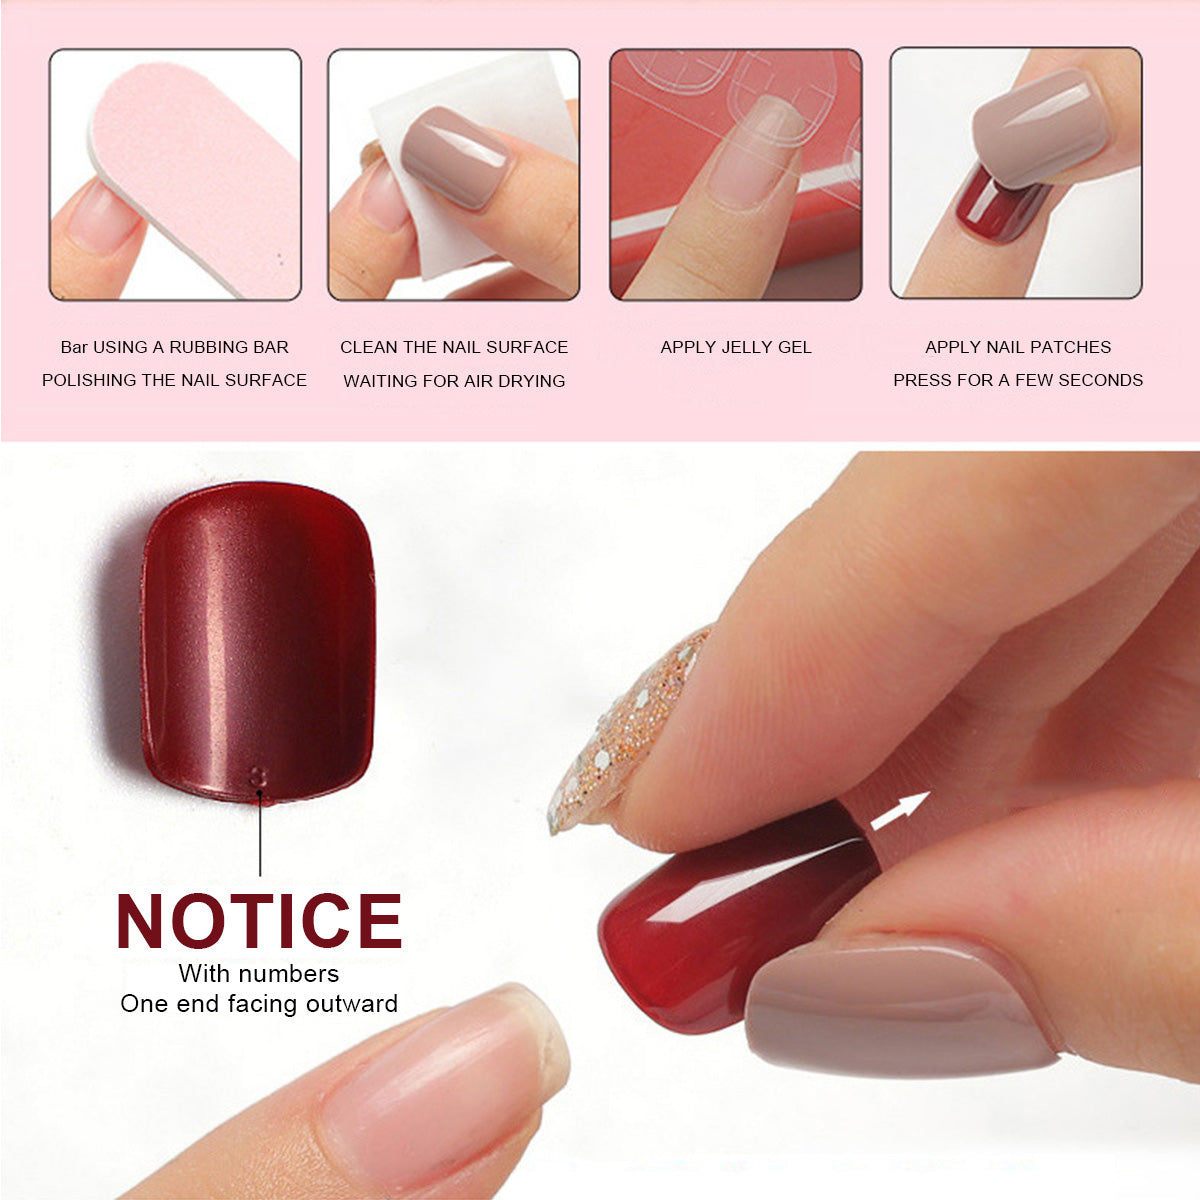 HOW TO DO RED LOUIS VUITTON NAILS TUTORIAL I LONG ACRYLIC COFFIN